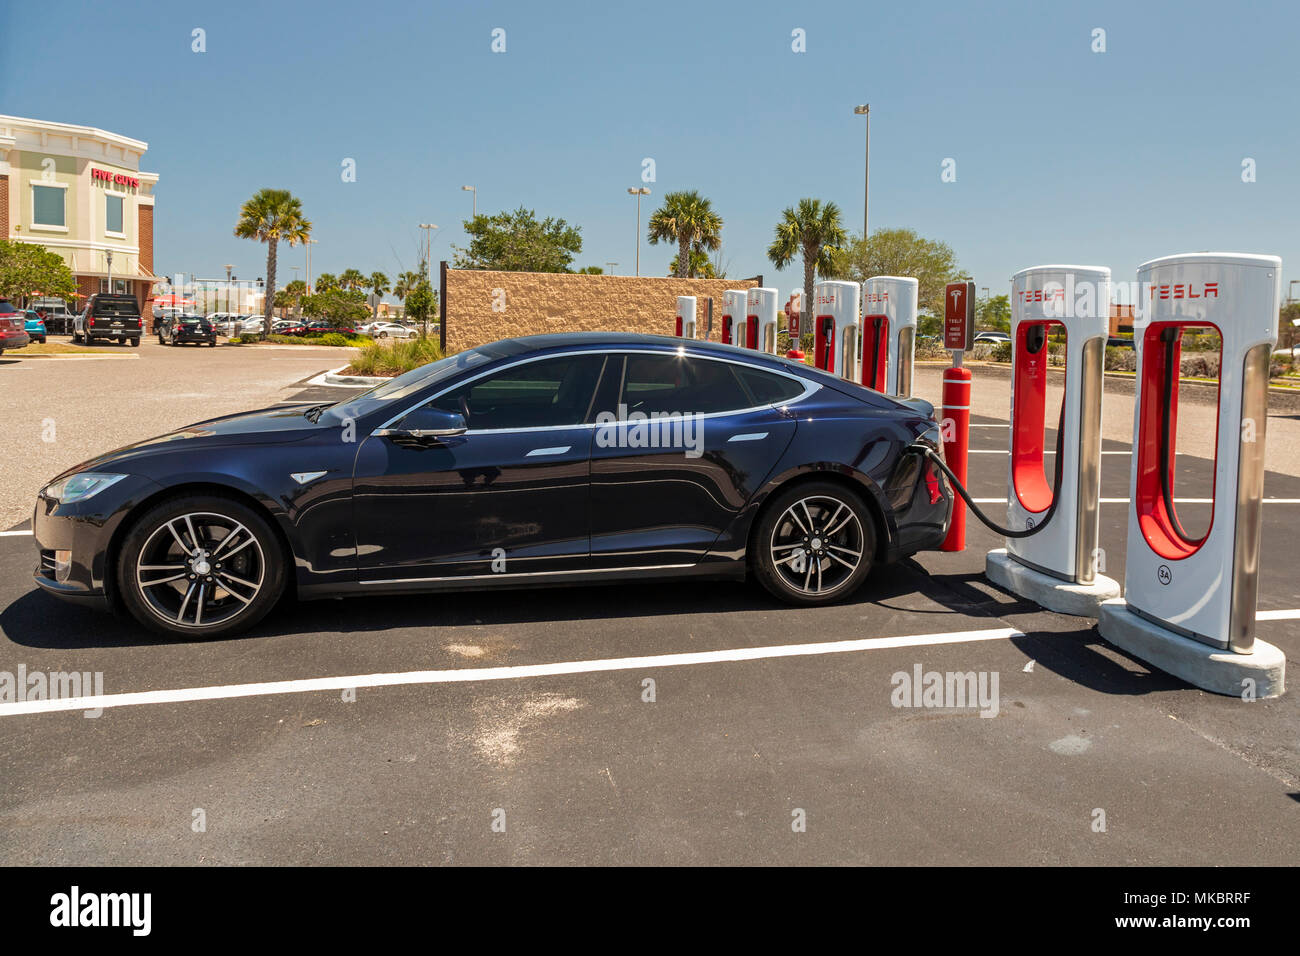 West Melbourne, Florida - A Tesla Model S charging at an electric car Supercharger station. Stock Photo